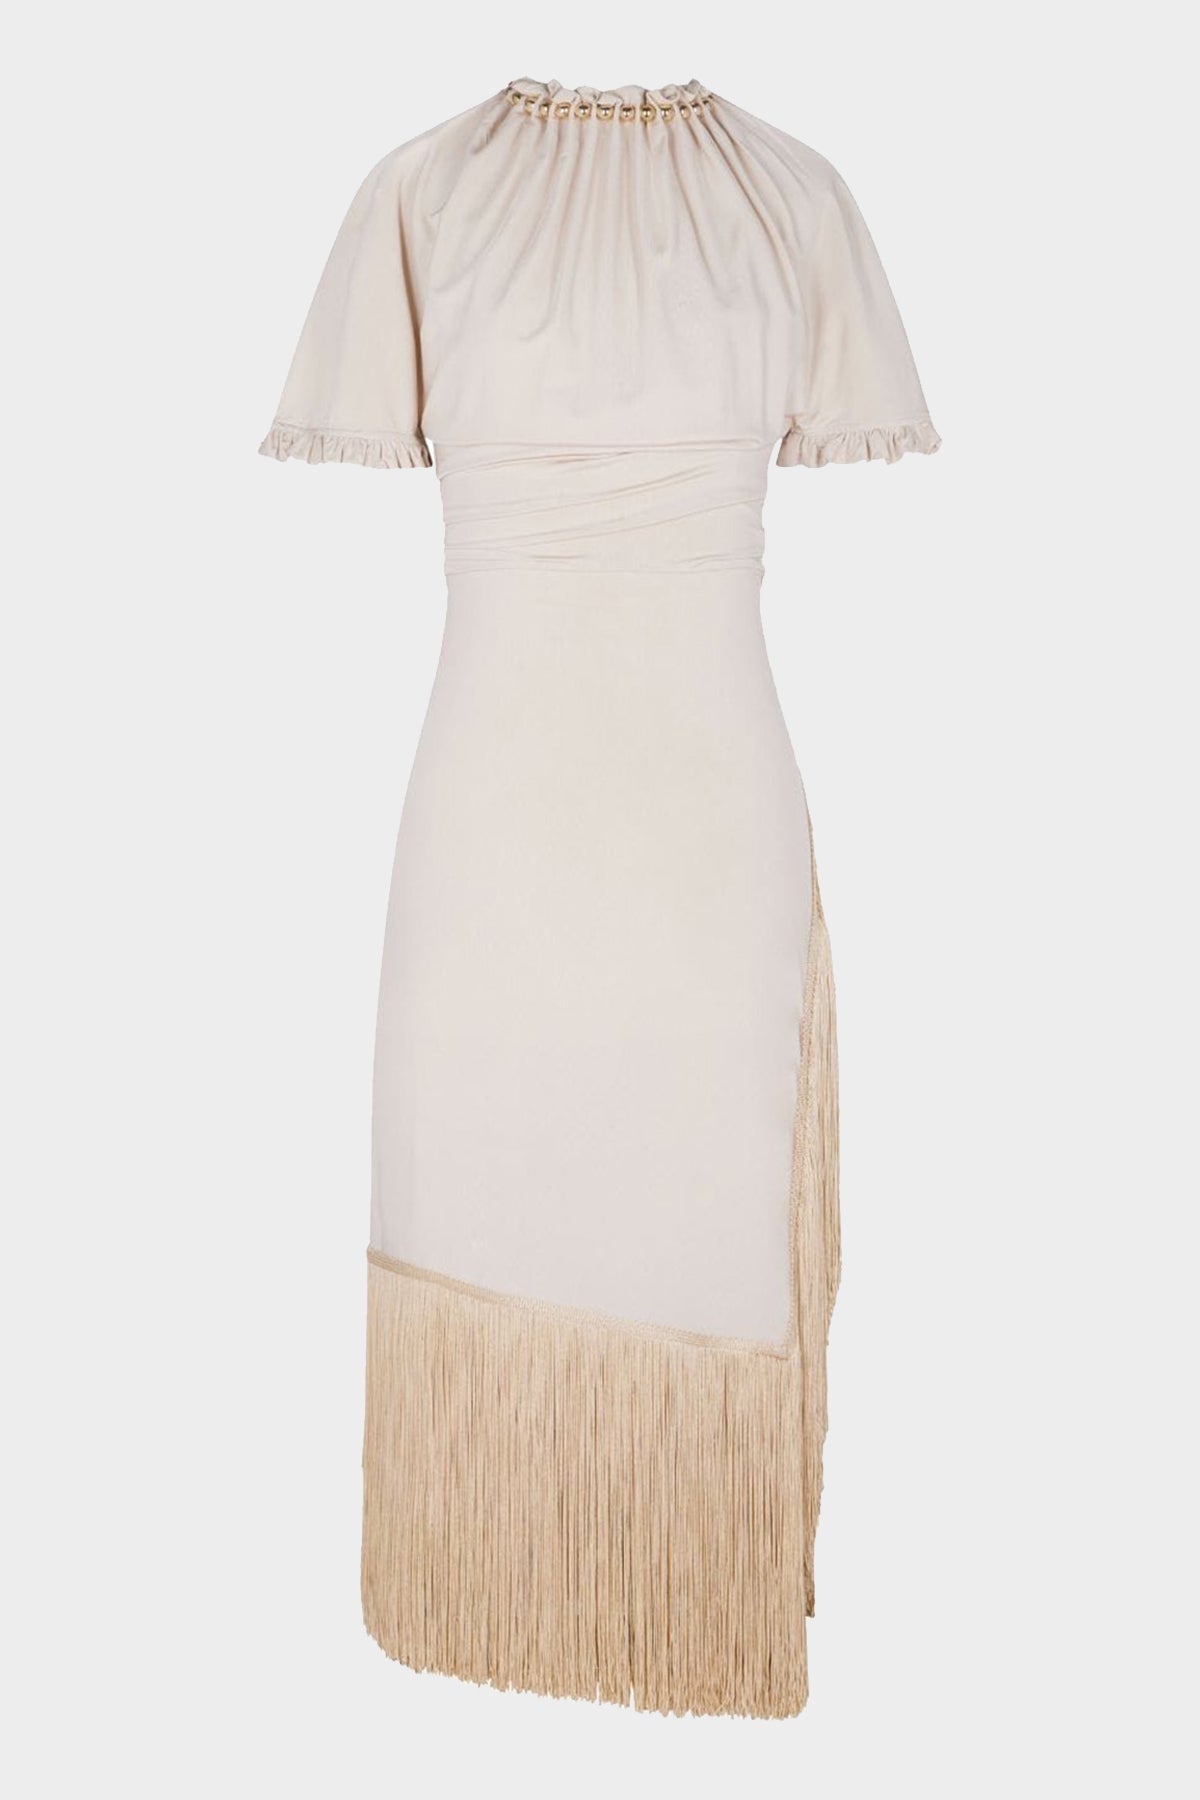 Jersey Cream Dress with Beads in Nude - shop-olivia.com